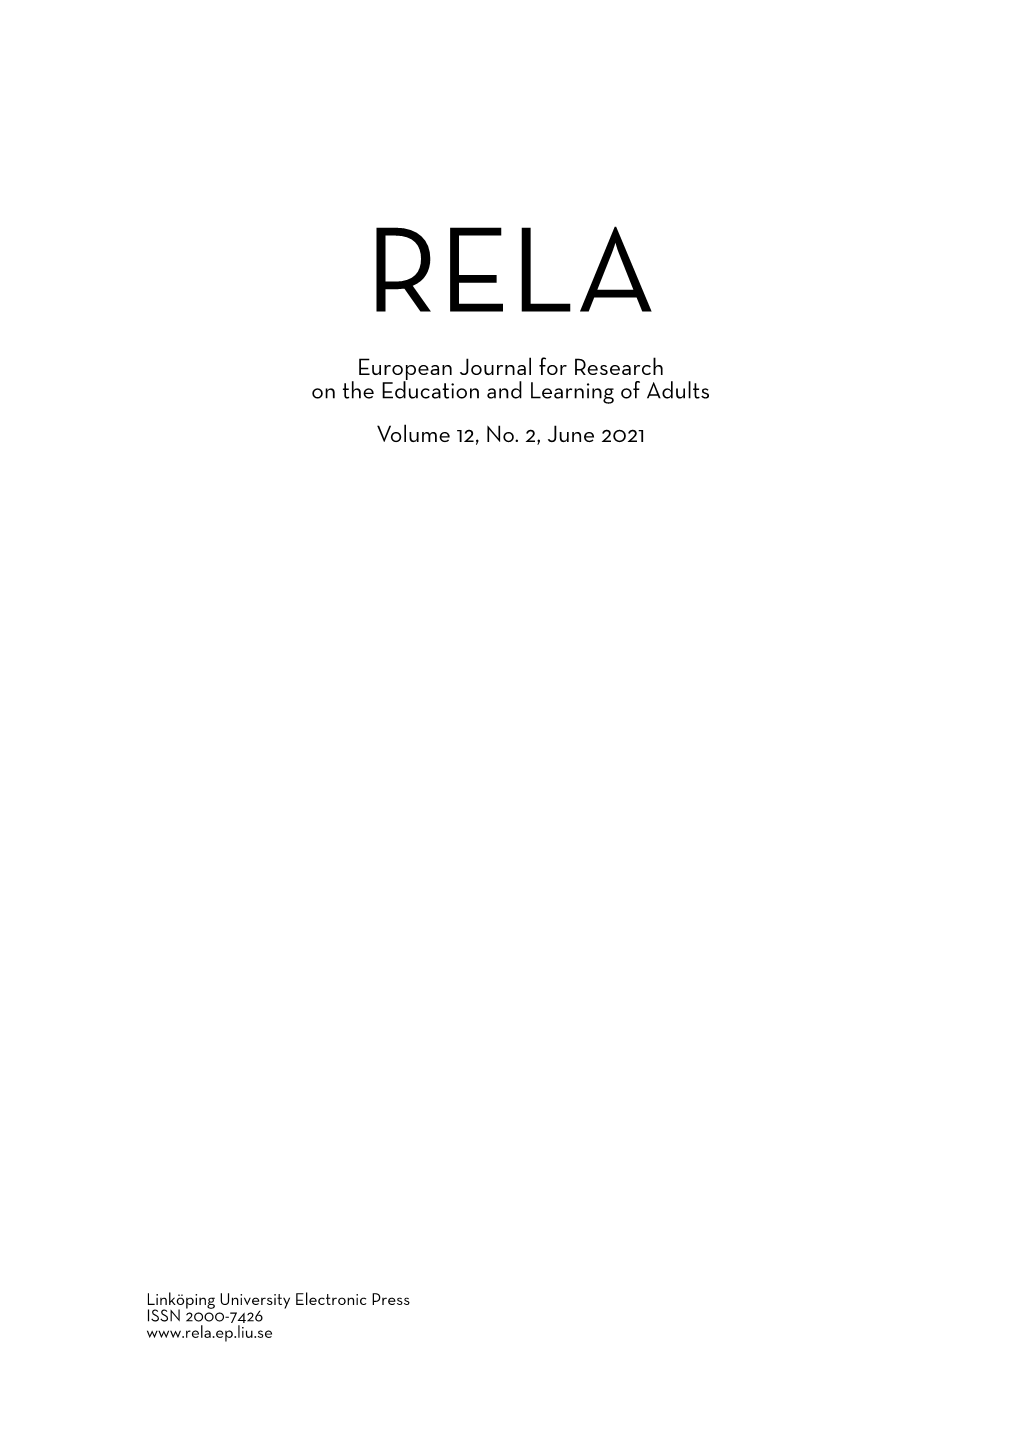 RELA European Journal for Research on the Education and Learning of Adults Volume 12, No